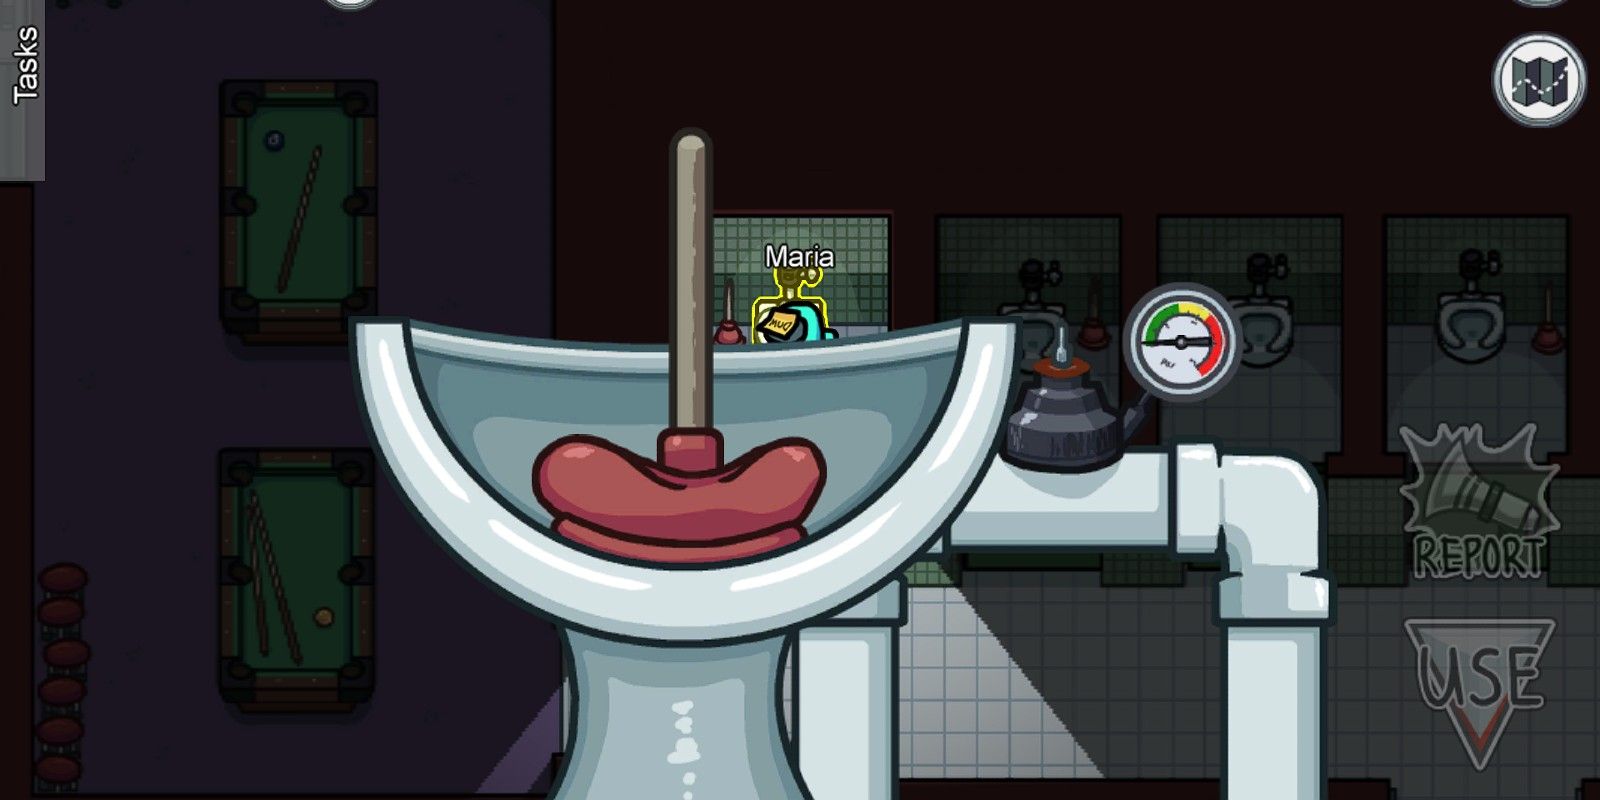 A player plunges the toilet in Among Us